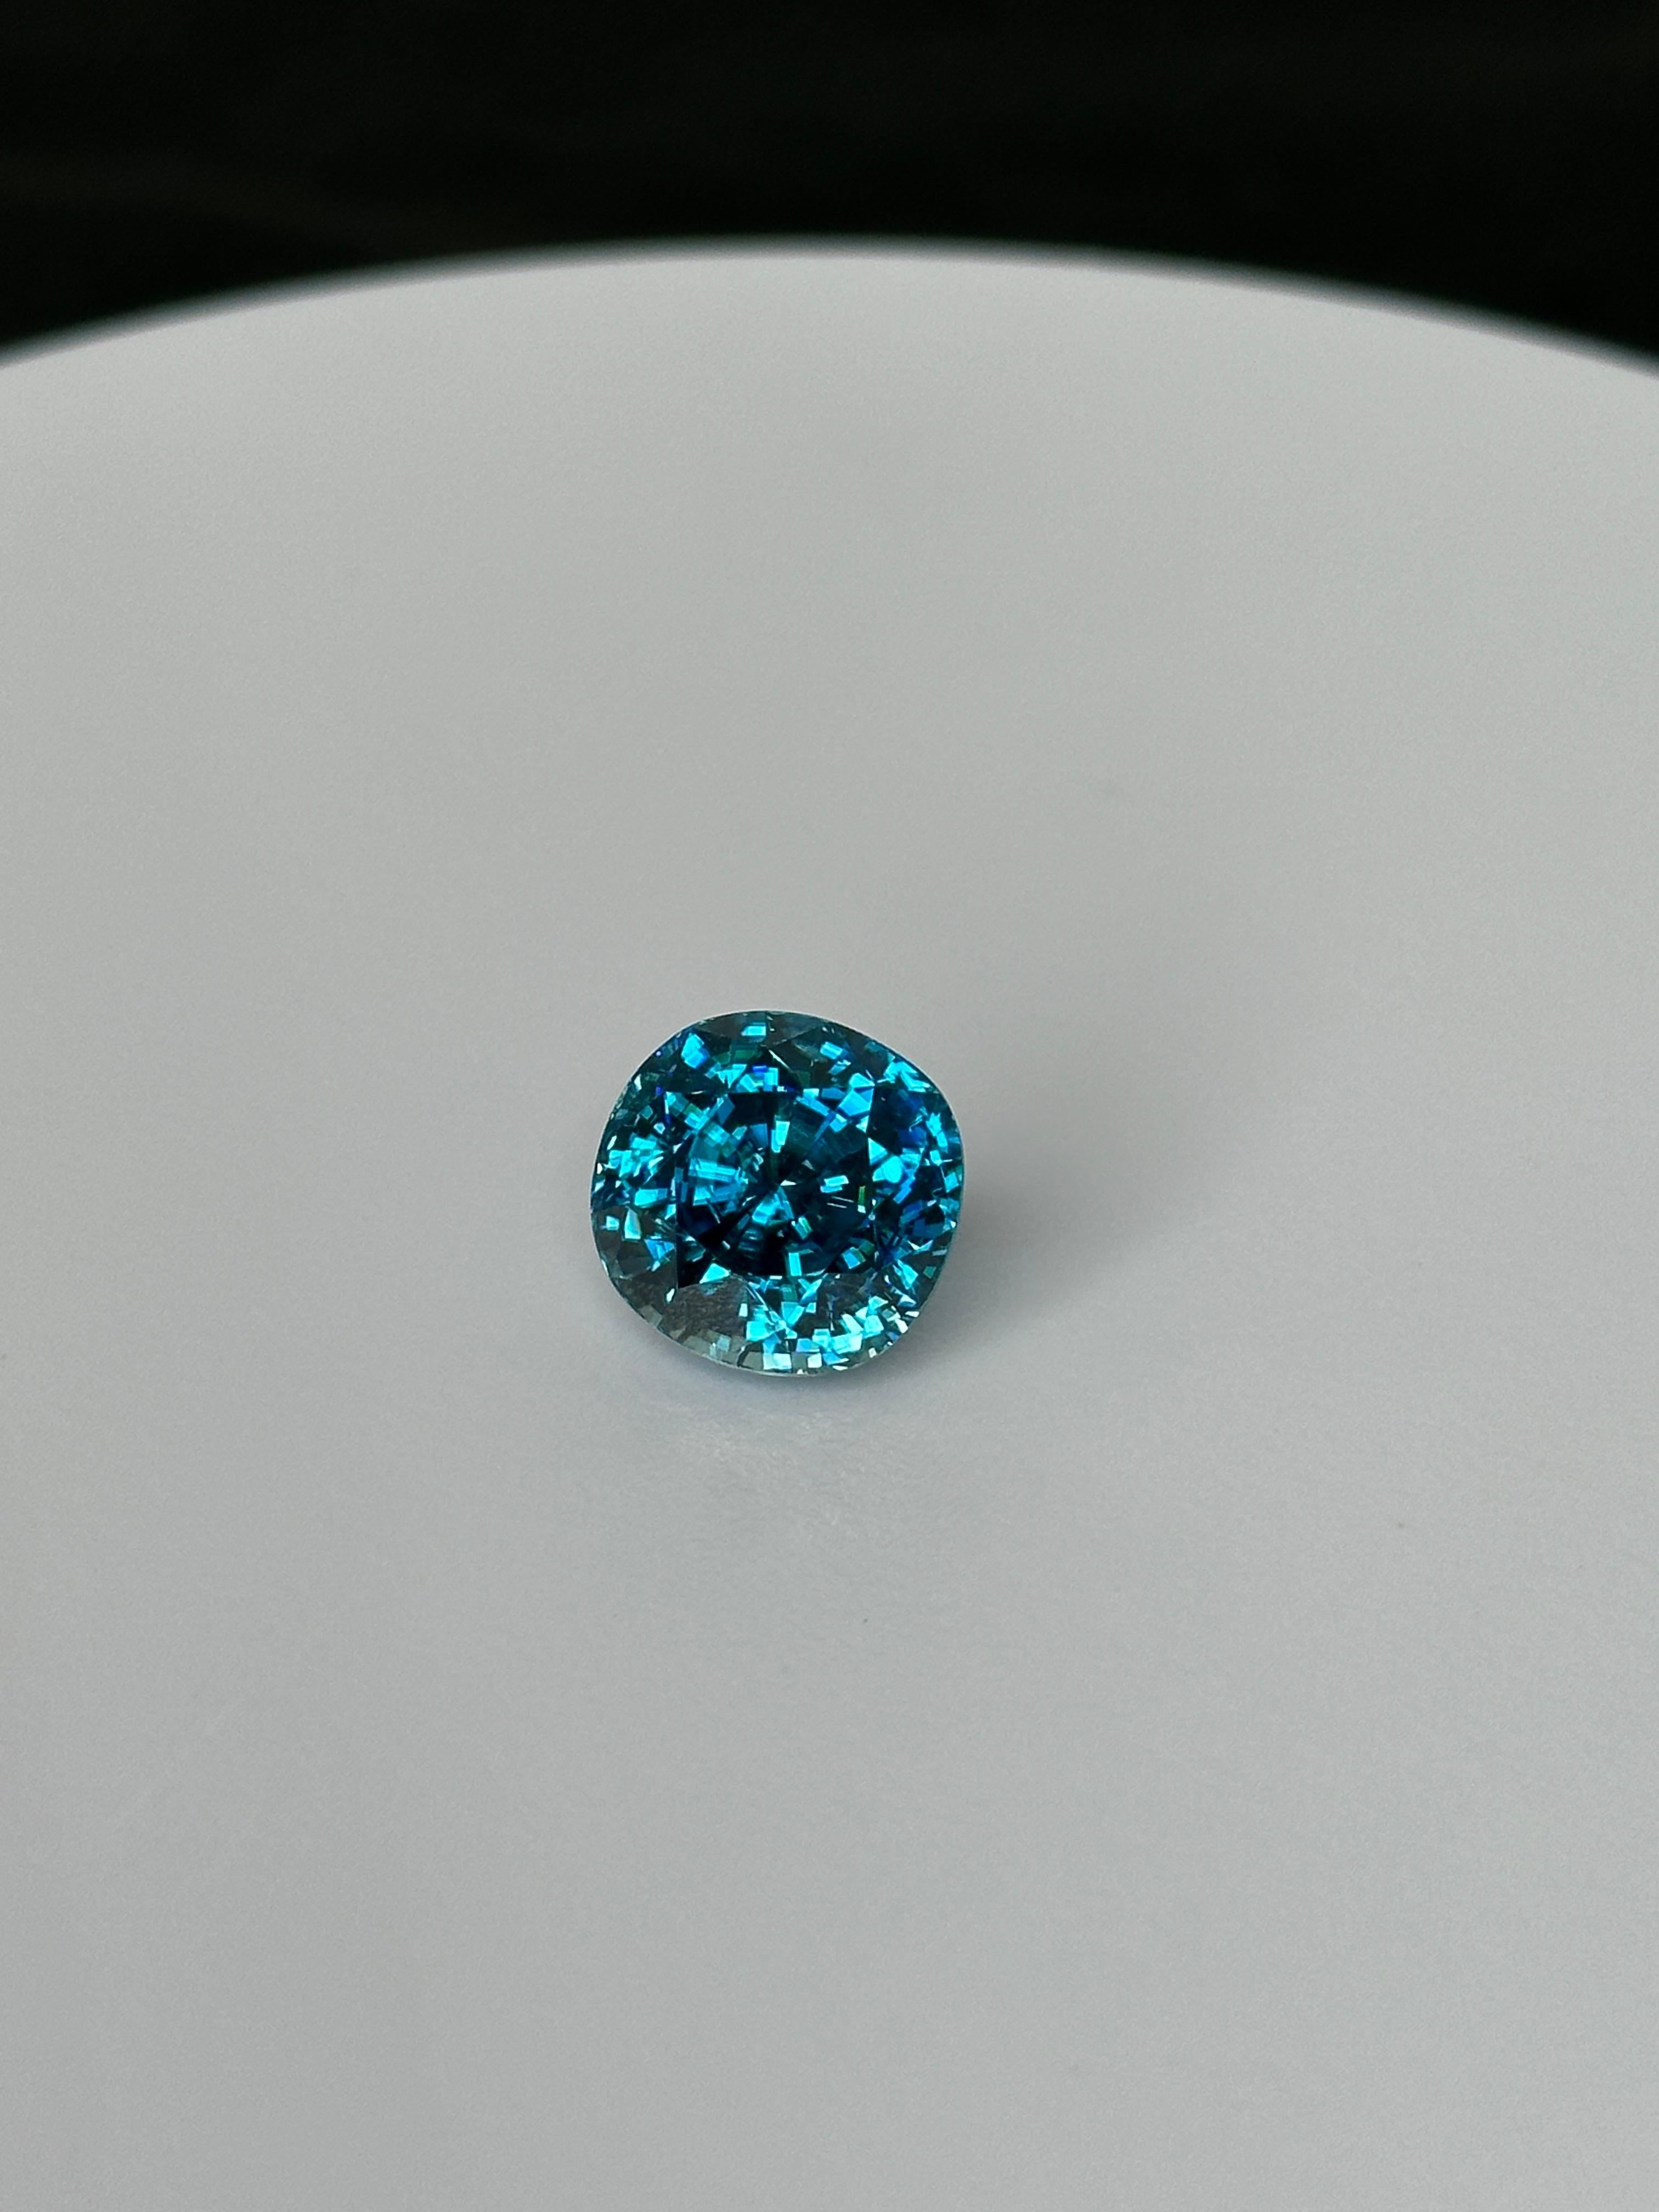 Cushion Cut 17 Carat Collector's Cambodian Blue Zircon For Sale